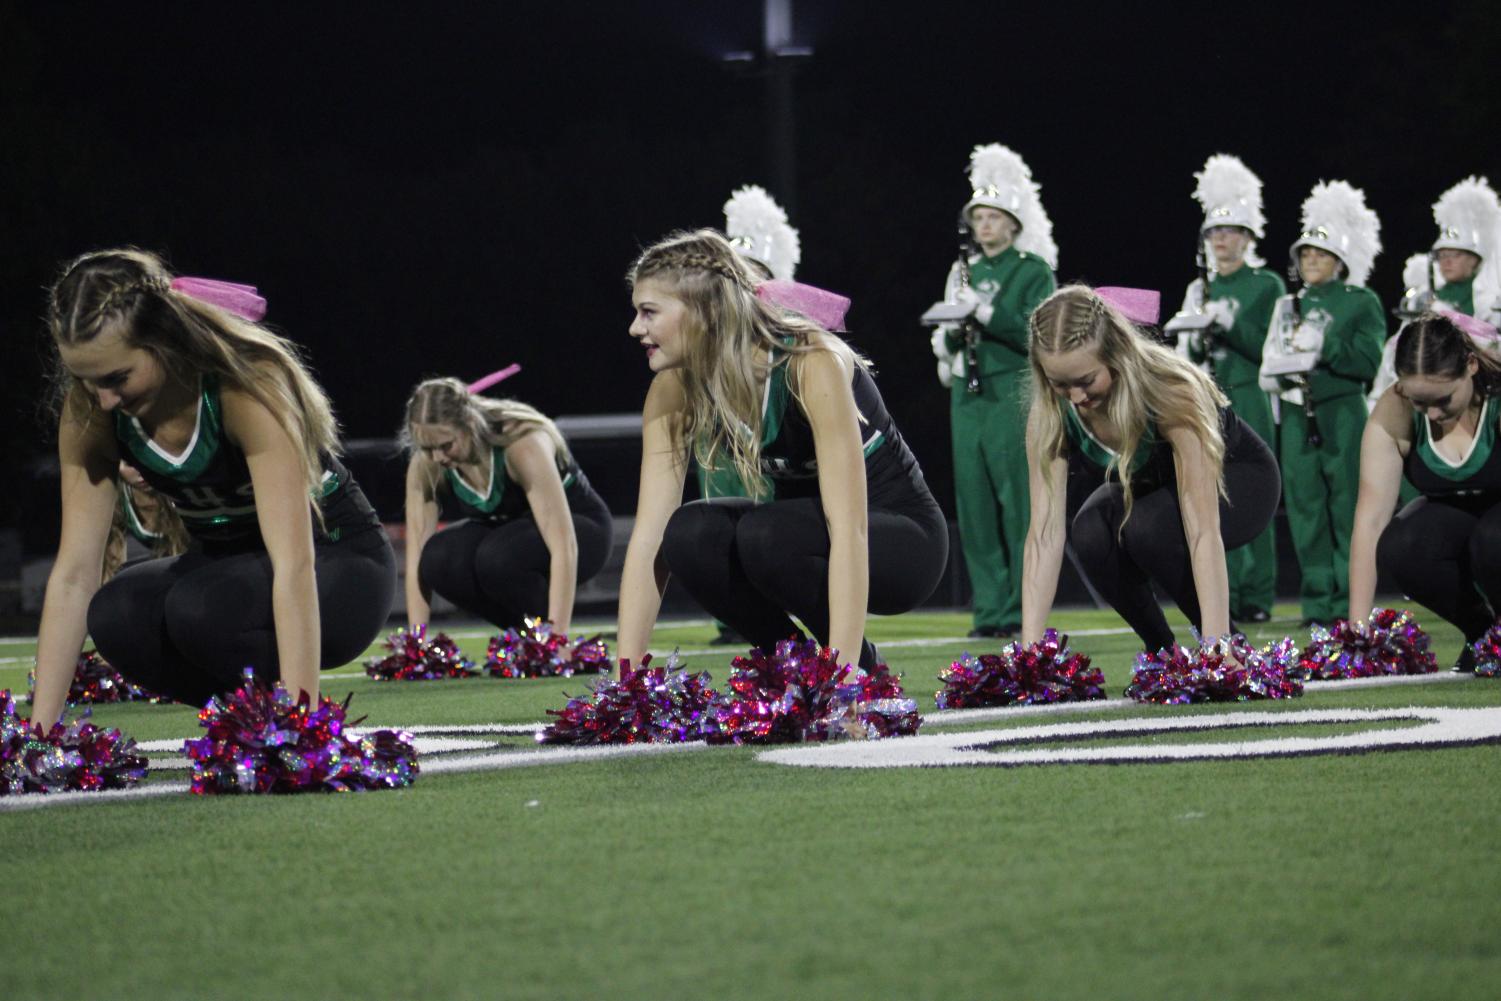 Cheer+and+Dance+Team+at+Campus+Football+Game+%28Photos+by+Agness+Mbezi%29